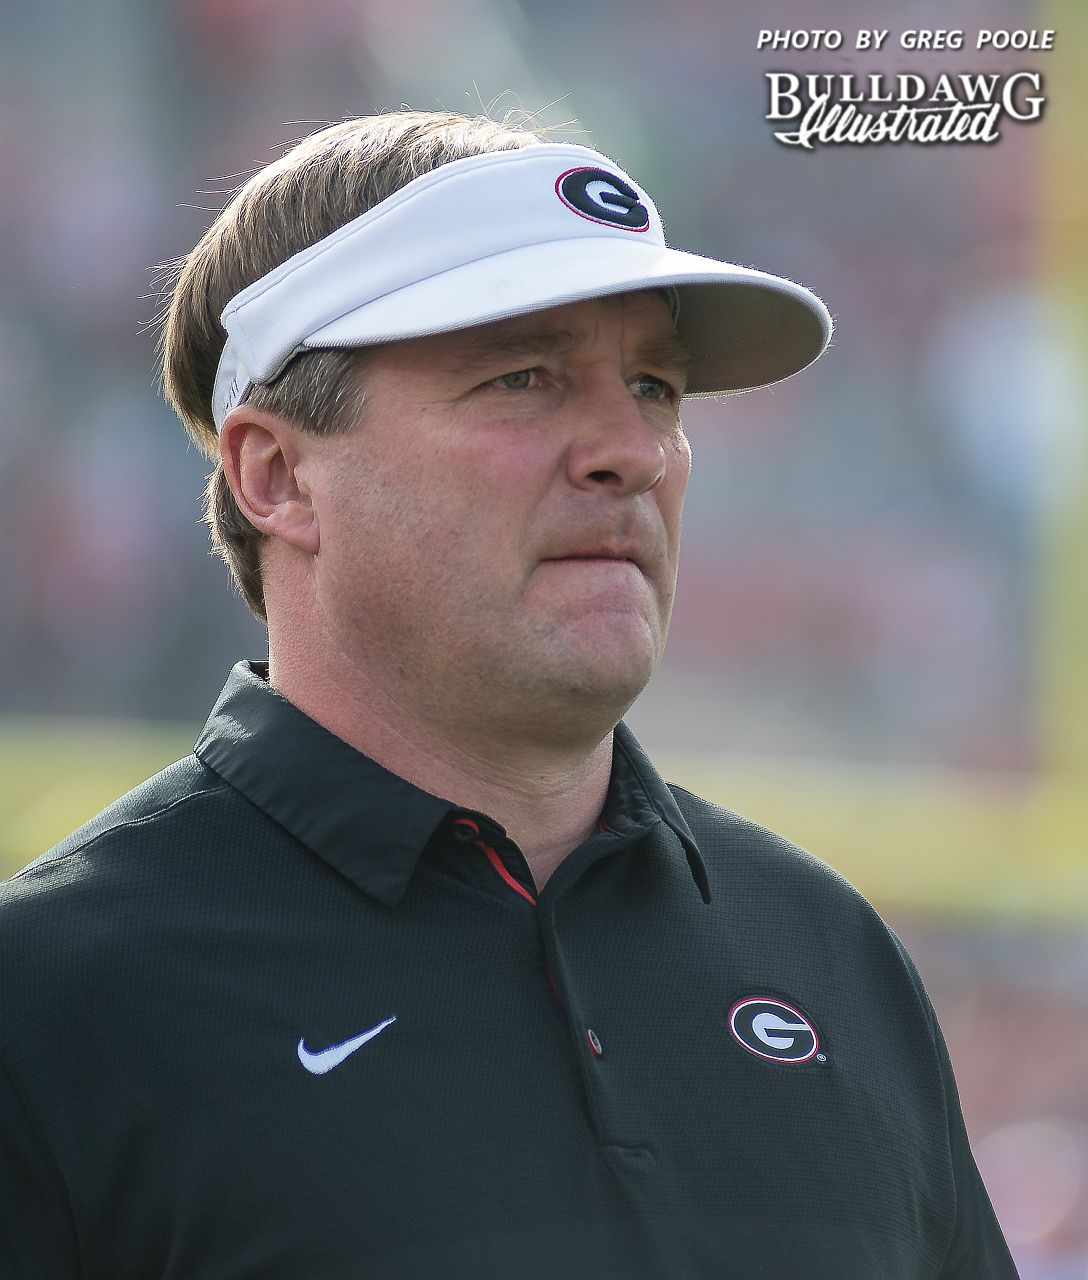 Georgia Head Coach Kirby Smart looks on at his Bulldogs in the Rose Bowl College Football Playoff Semifinal game versus Oklahoma, Monday, Jan. 1, 2018. (Photo: Greg Poole/Bulldawg Illustrated)